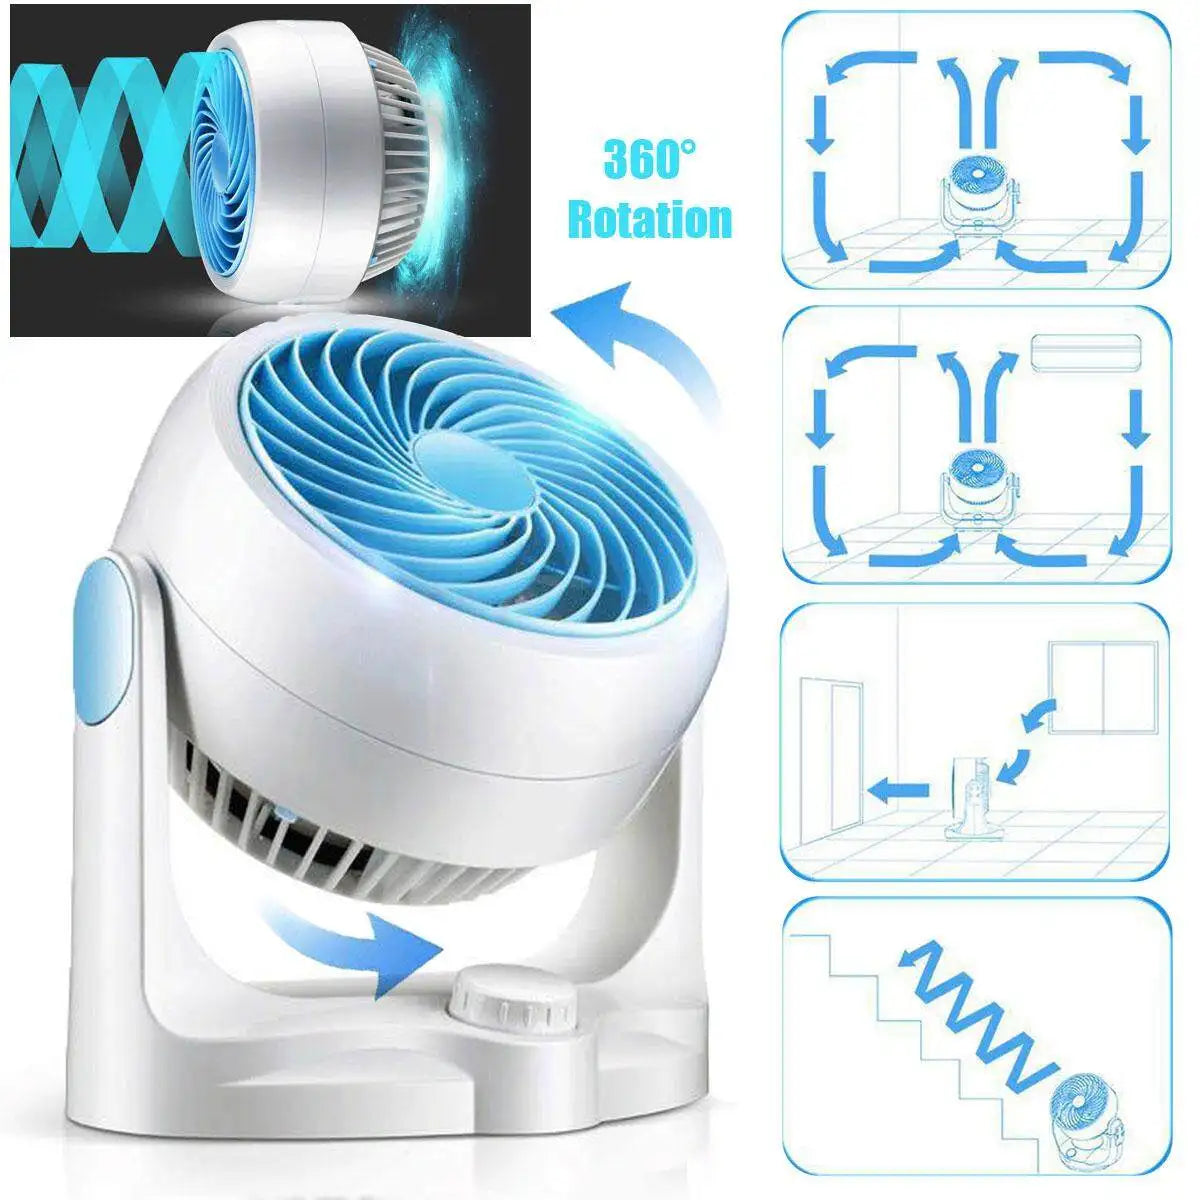 New 3 Speed Air Circulation Desktop Mini Electric Fan Air Convection Air Circulator Turbo Low Noise Cooler Fan for Office Home